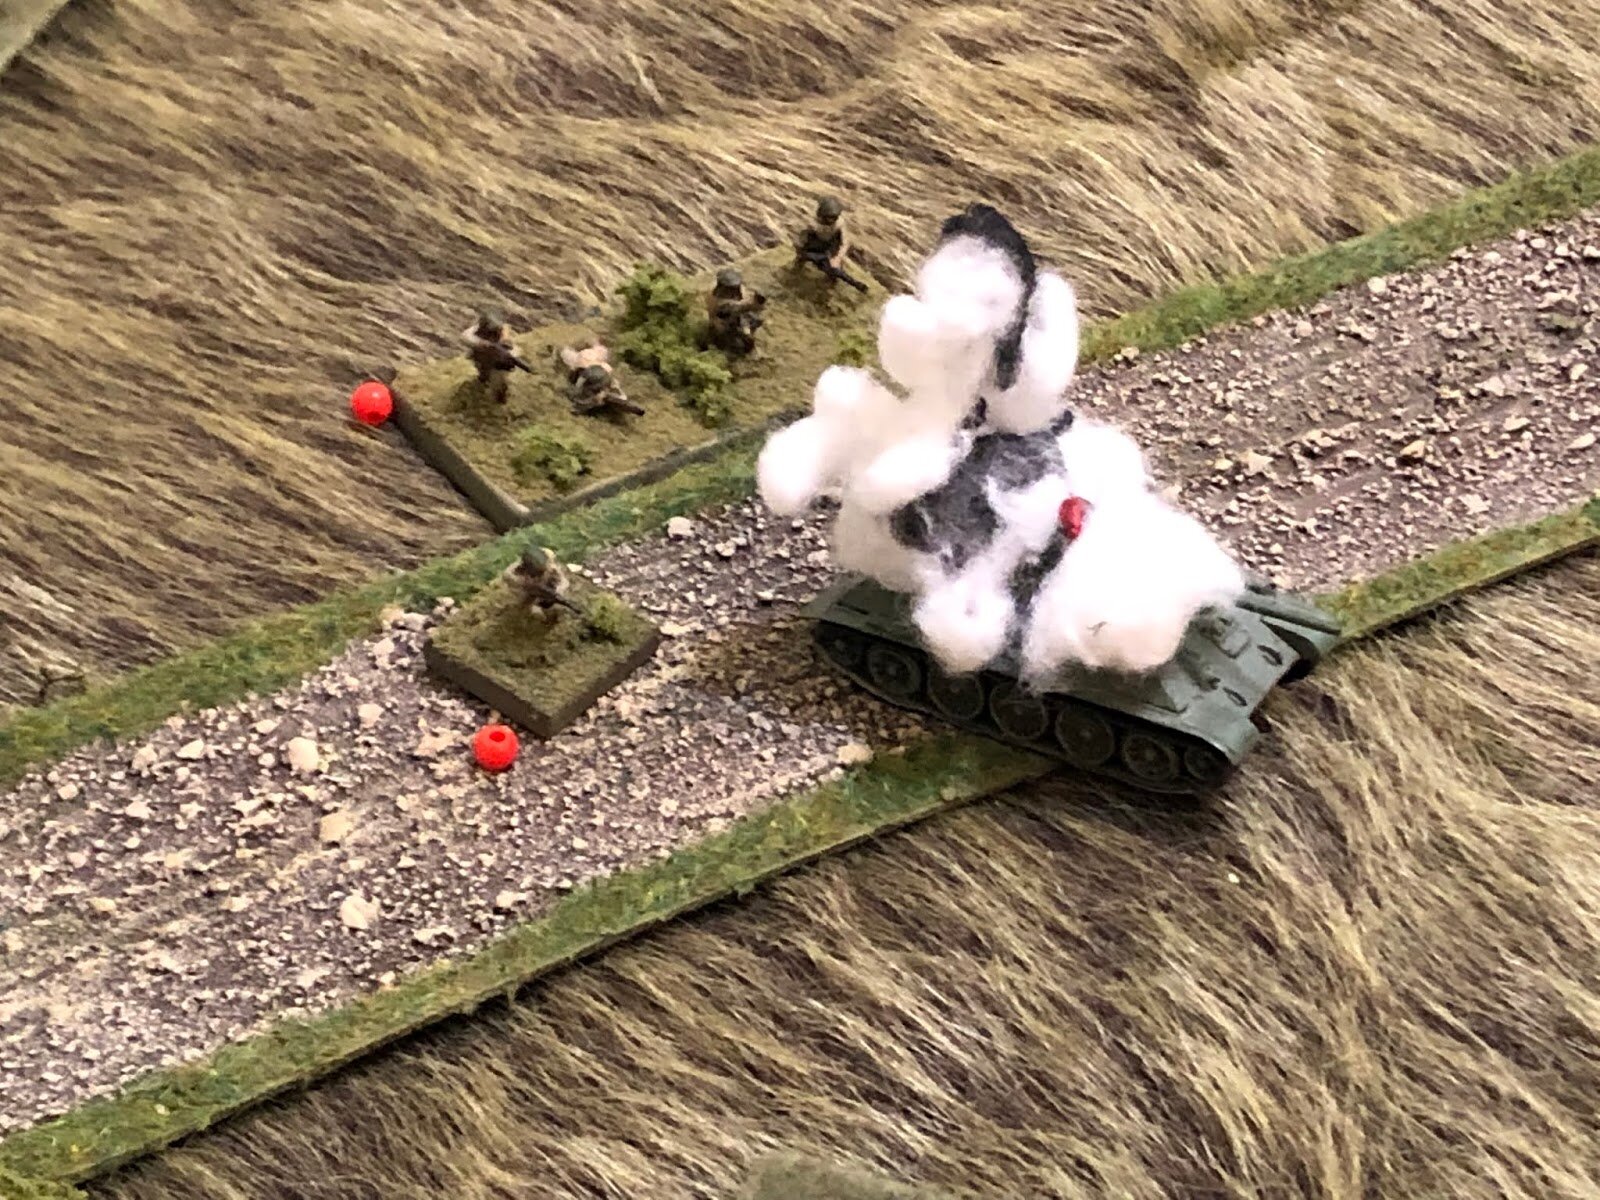  The T-34 is penetrated and knocked out, the infantry PC and riflemen jumping off, dazed.  